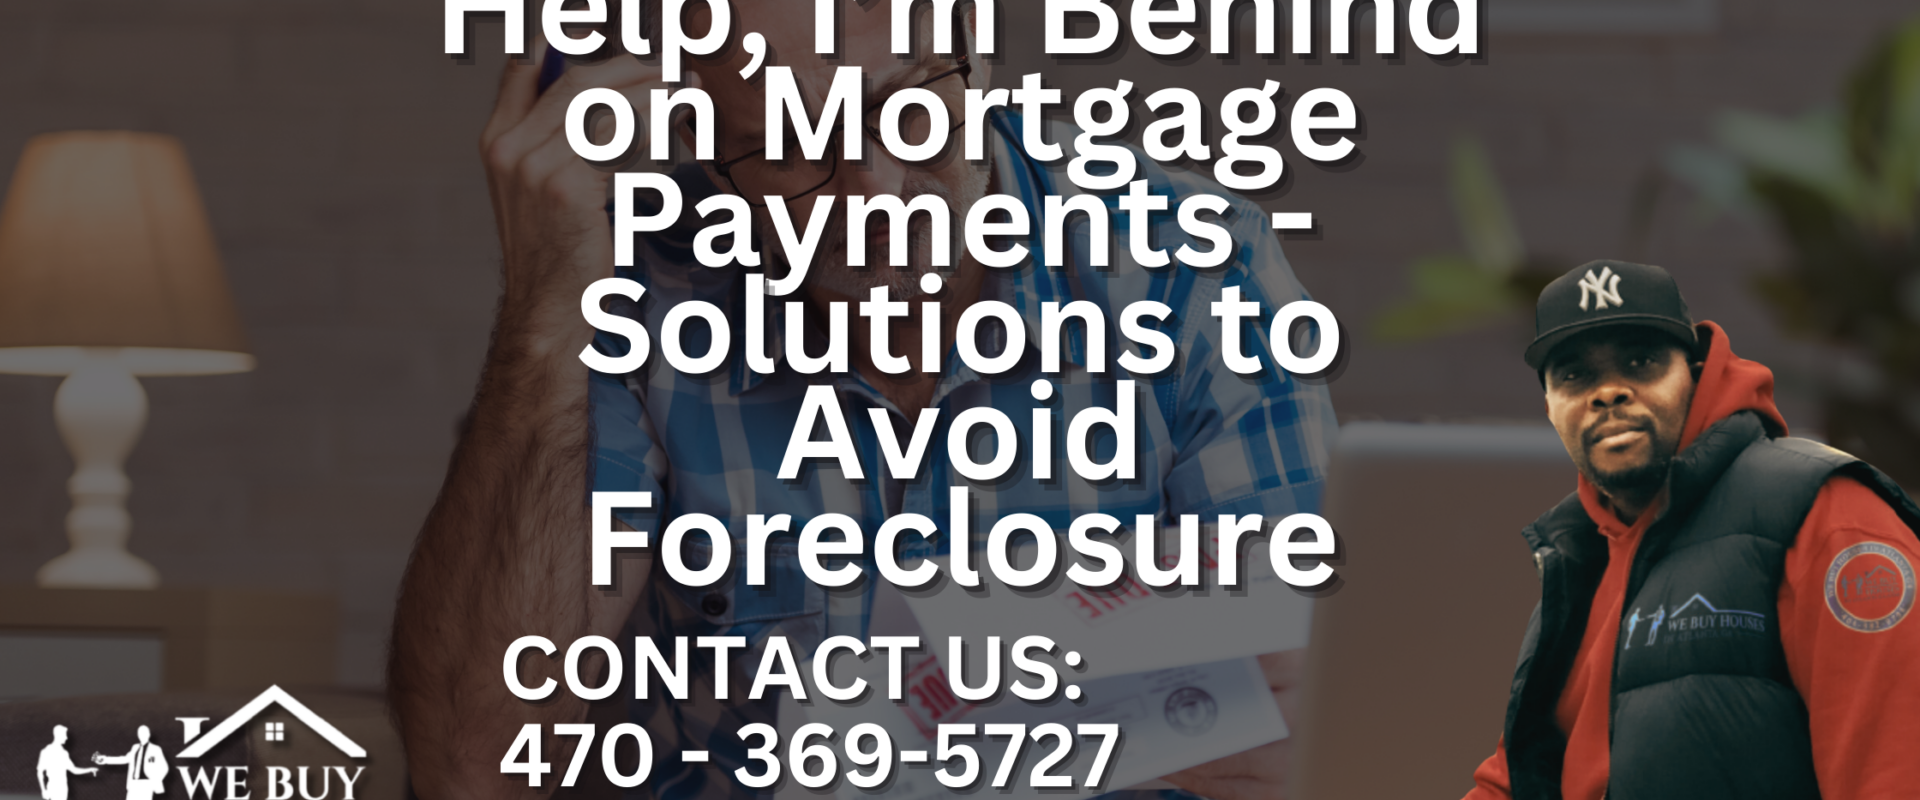 Help, I’m Behind on Mortgage Payments - Solutions to Avoid Foreclosure